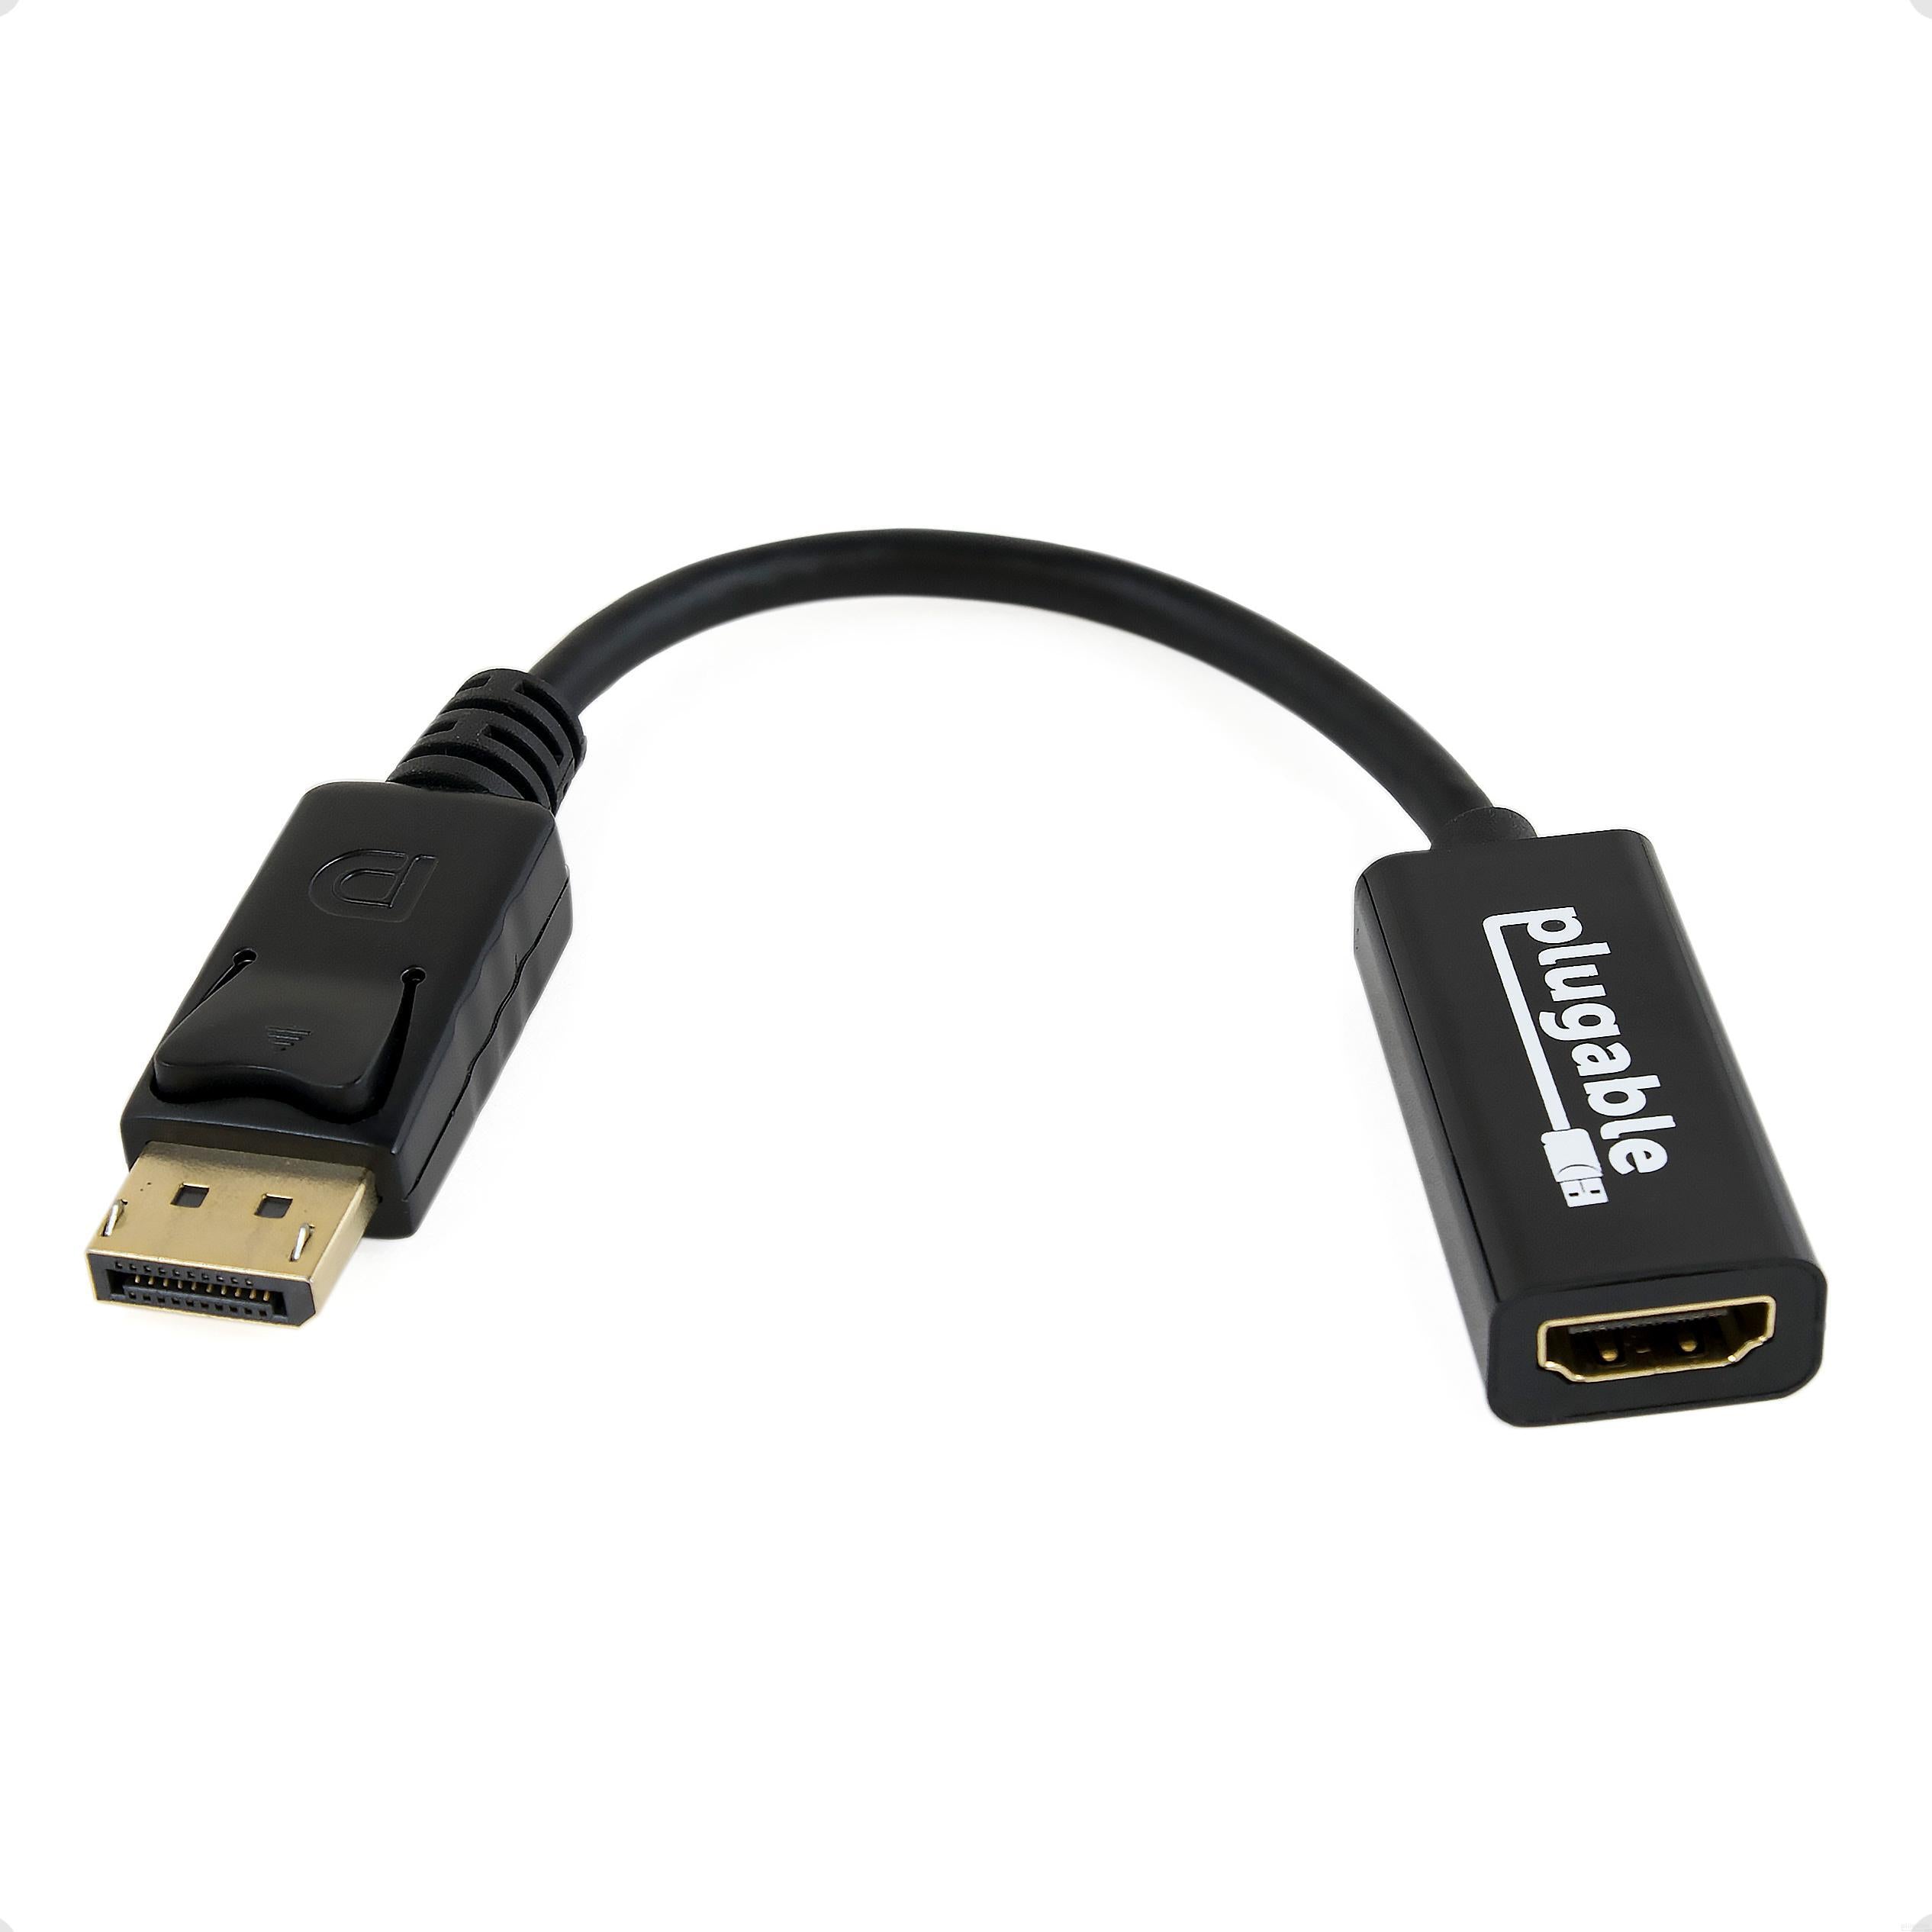 7 Ways to Fix HDMI to DisplayPort Not Working - Guiding Tech